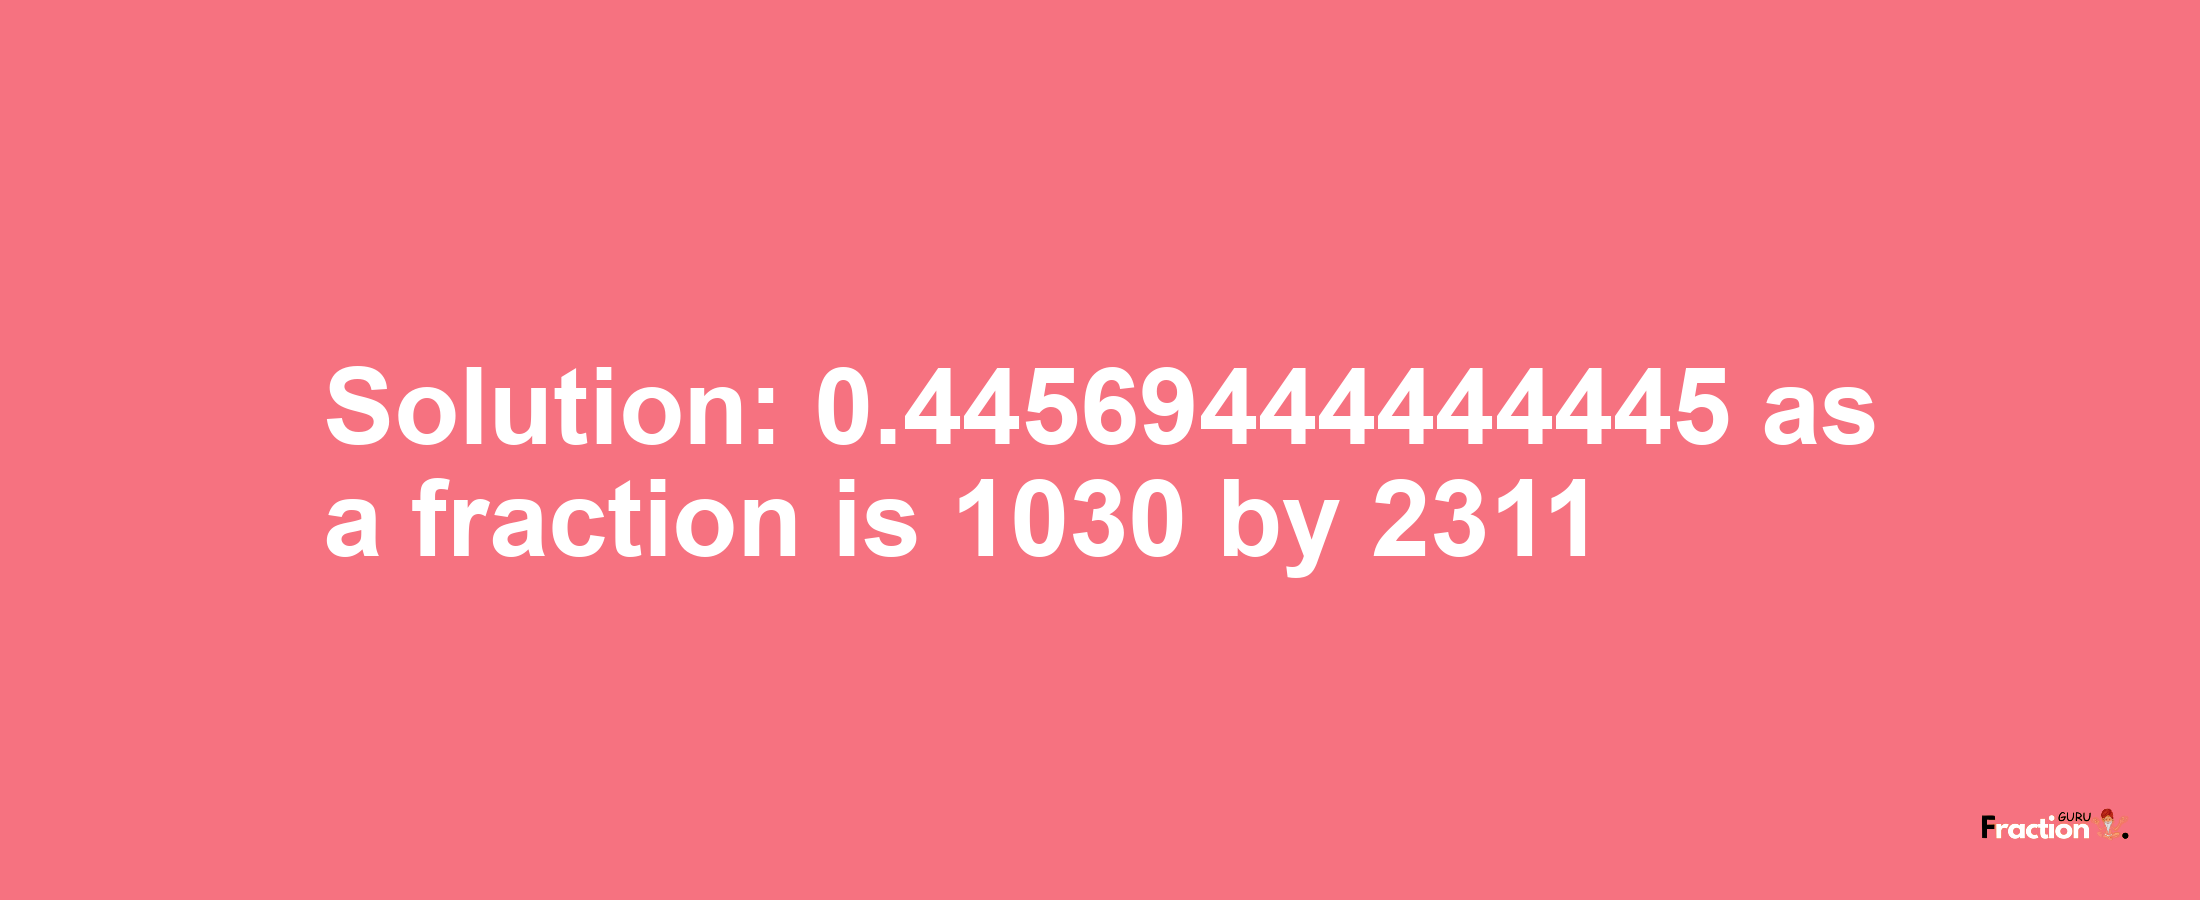 Solution:0.44569444444445 as a fraction is 1030/2311